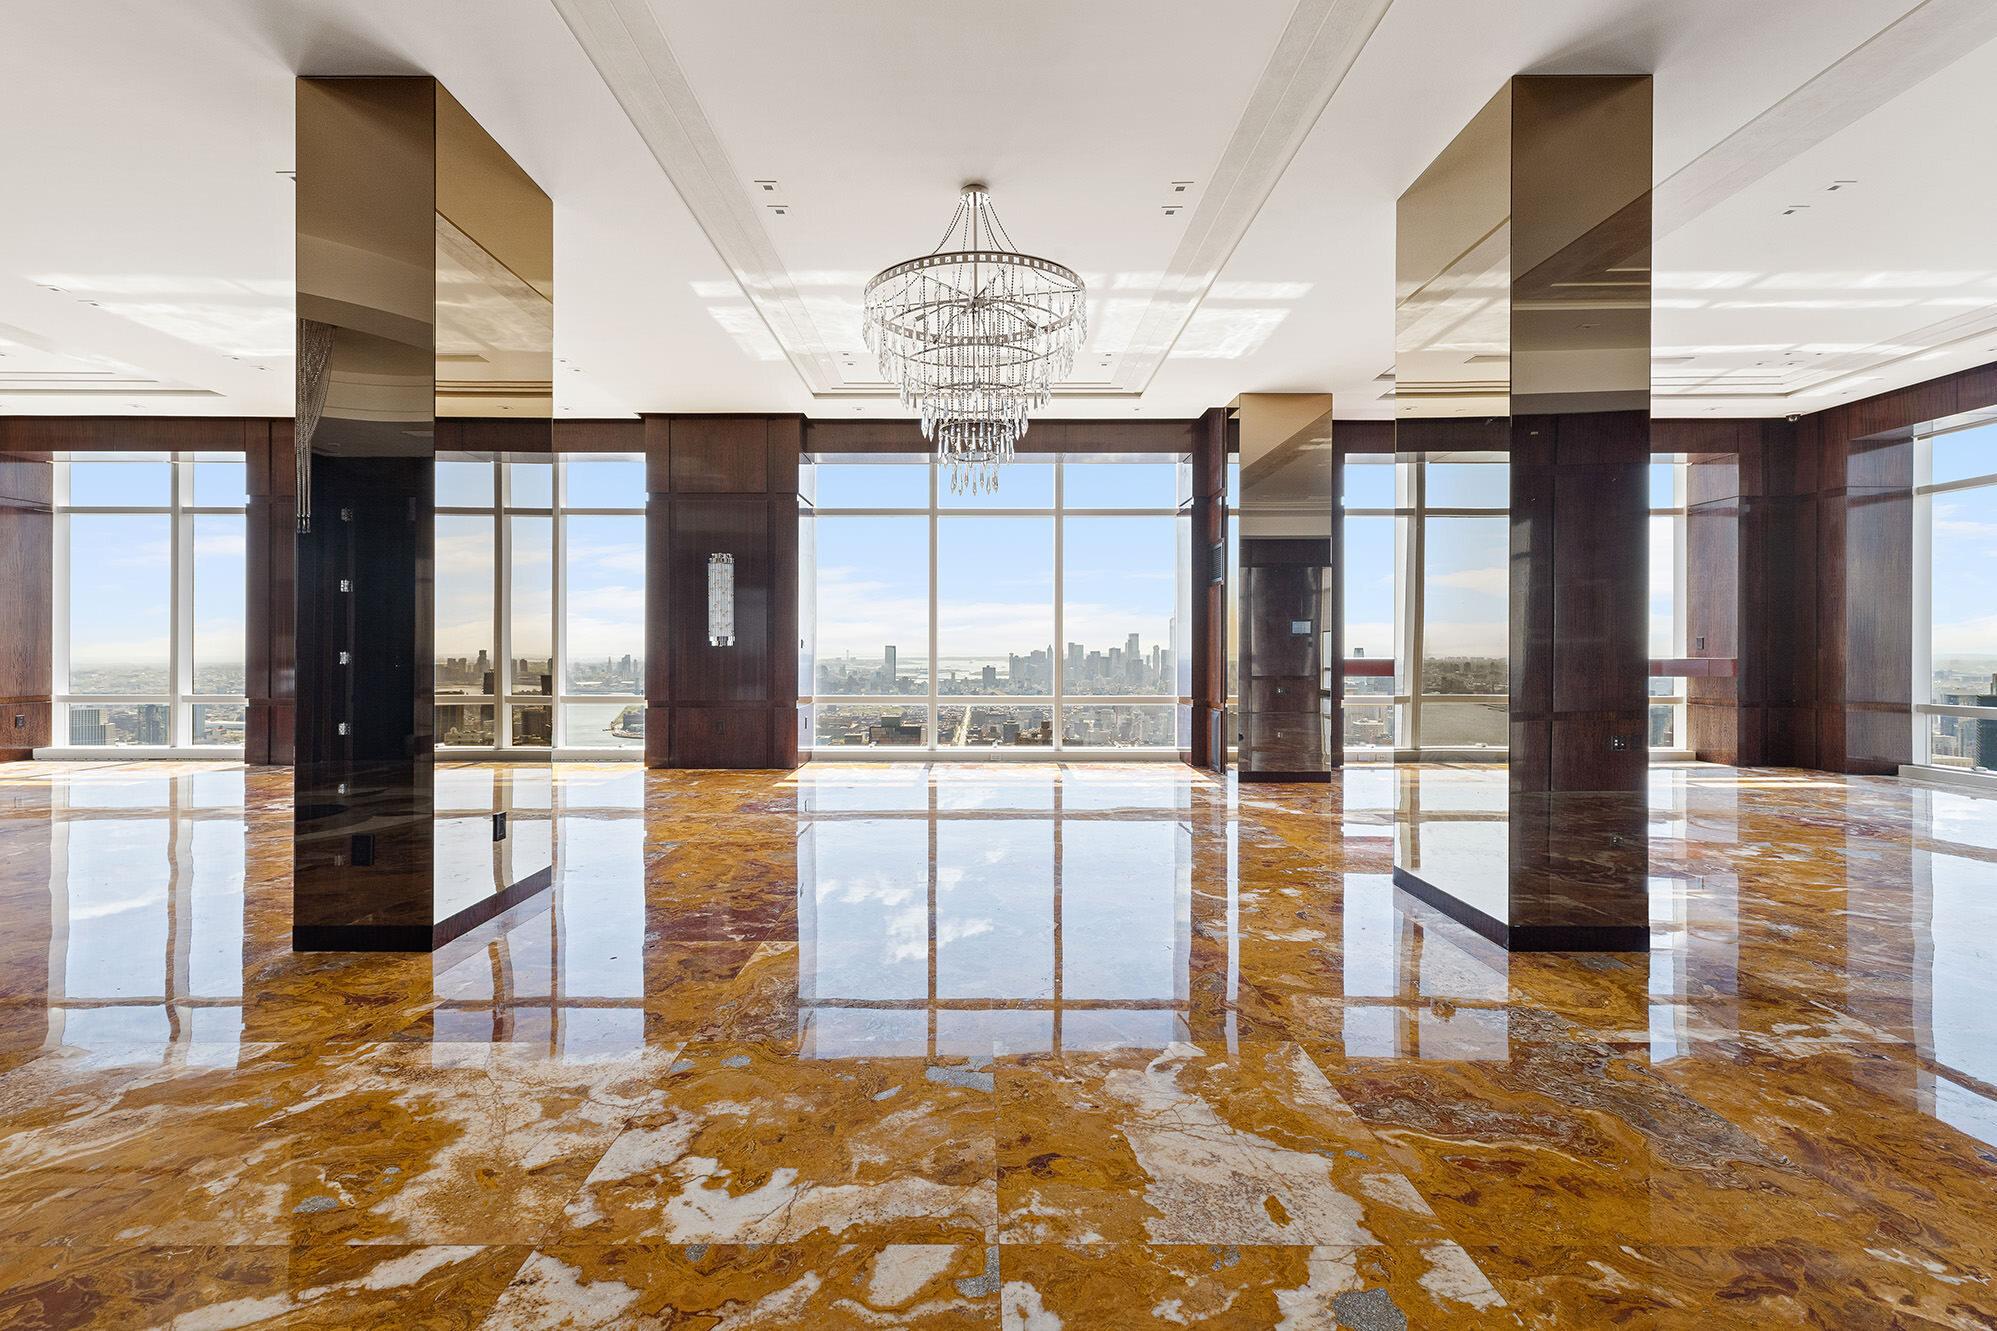 Design details include marble floors.